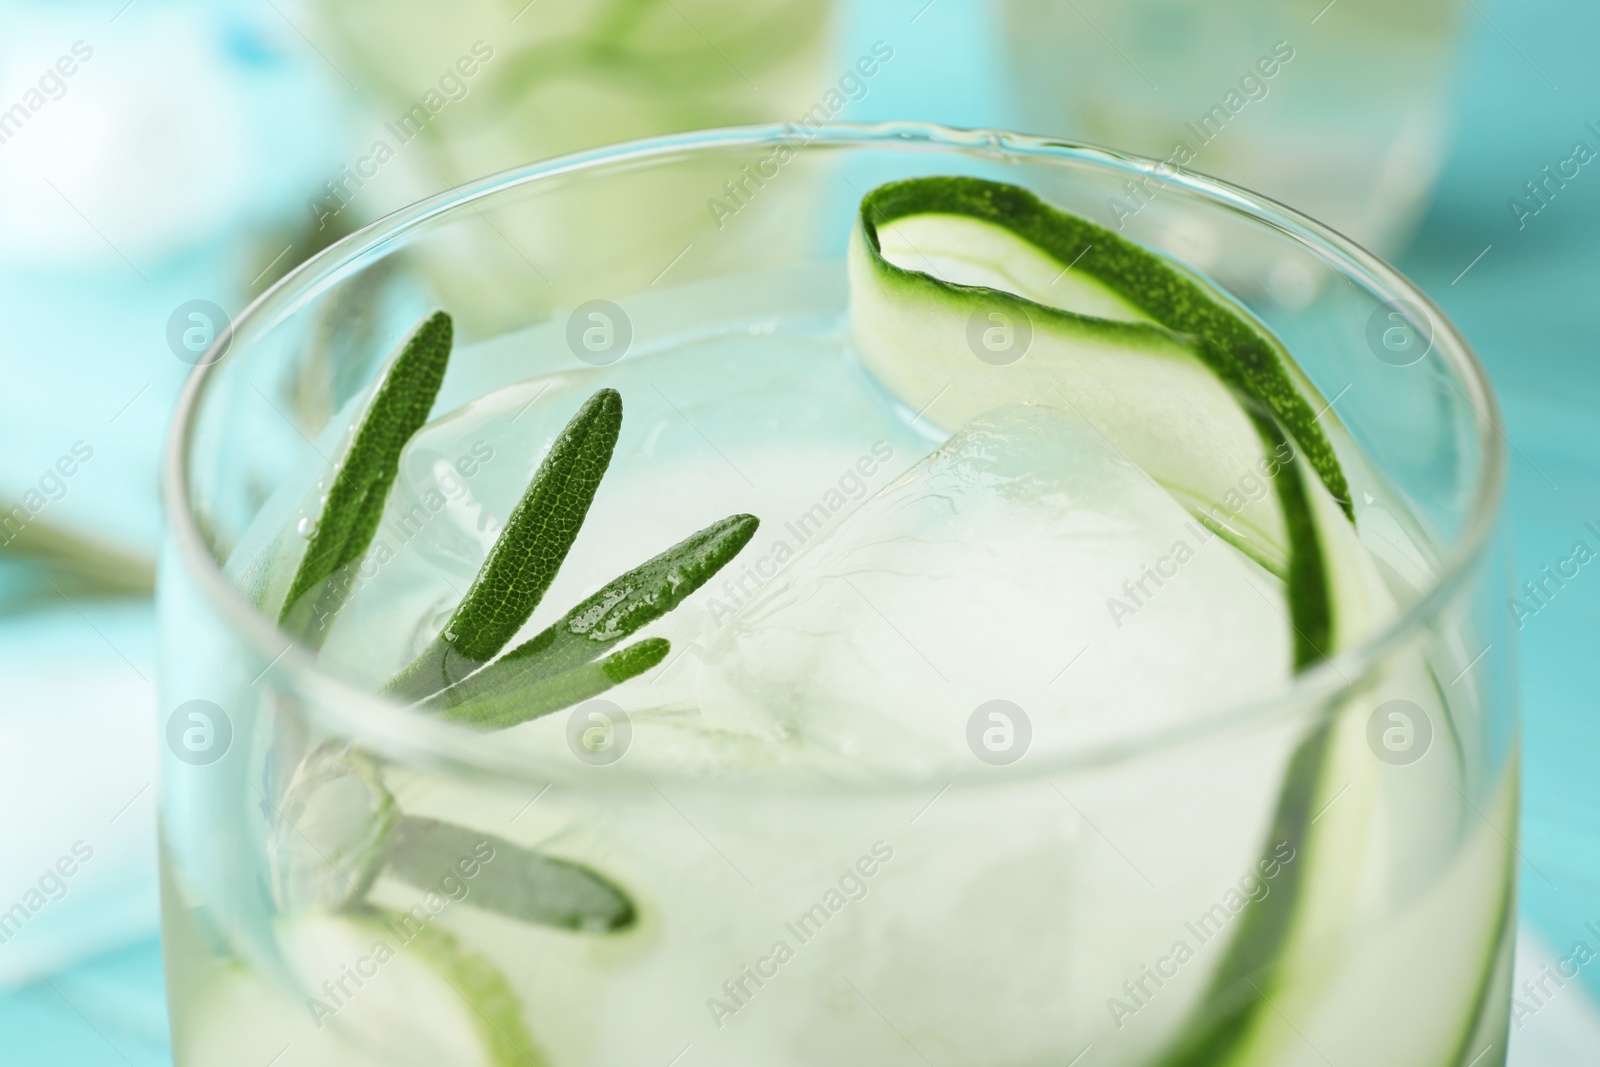 Photo of Glass of refreshing cucumber lemonade on table, closeup. Summer drink